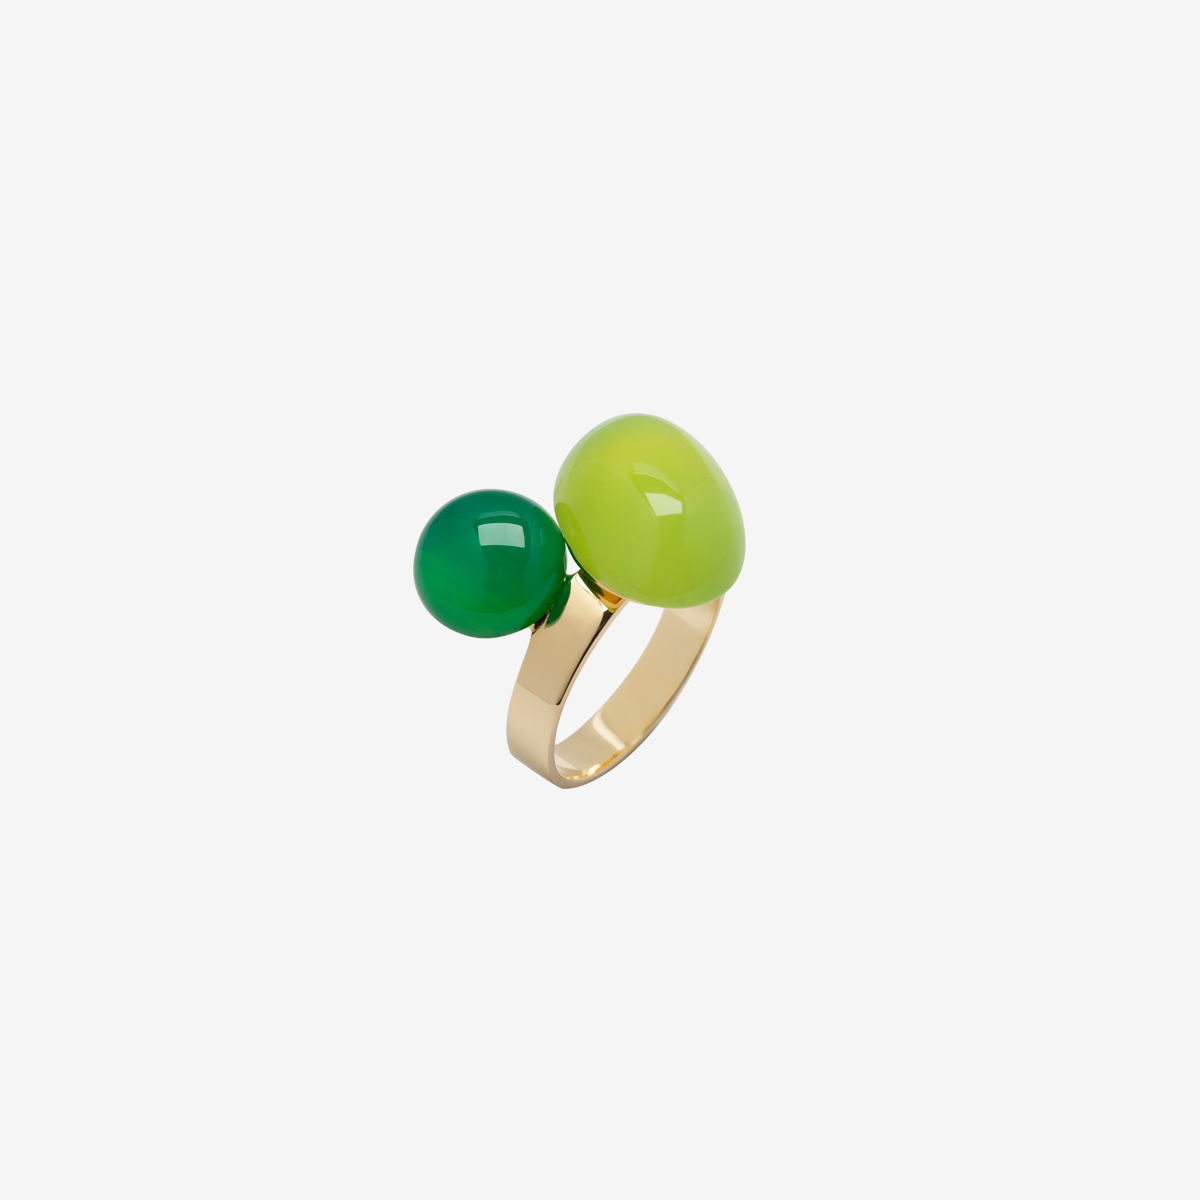 Gam handmade 18k gold plated 925 silver, green chalcedony and green agate ring designed by Belen Bajo